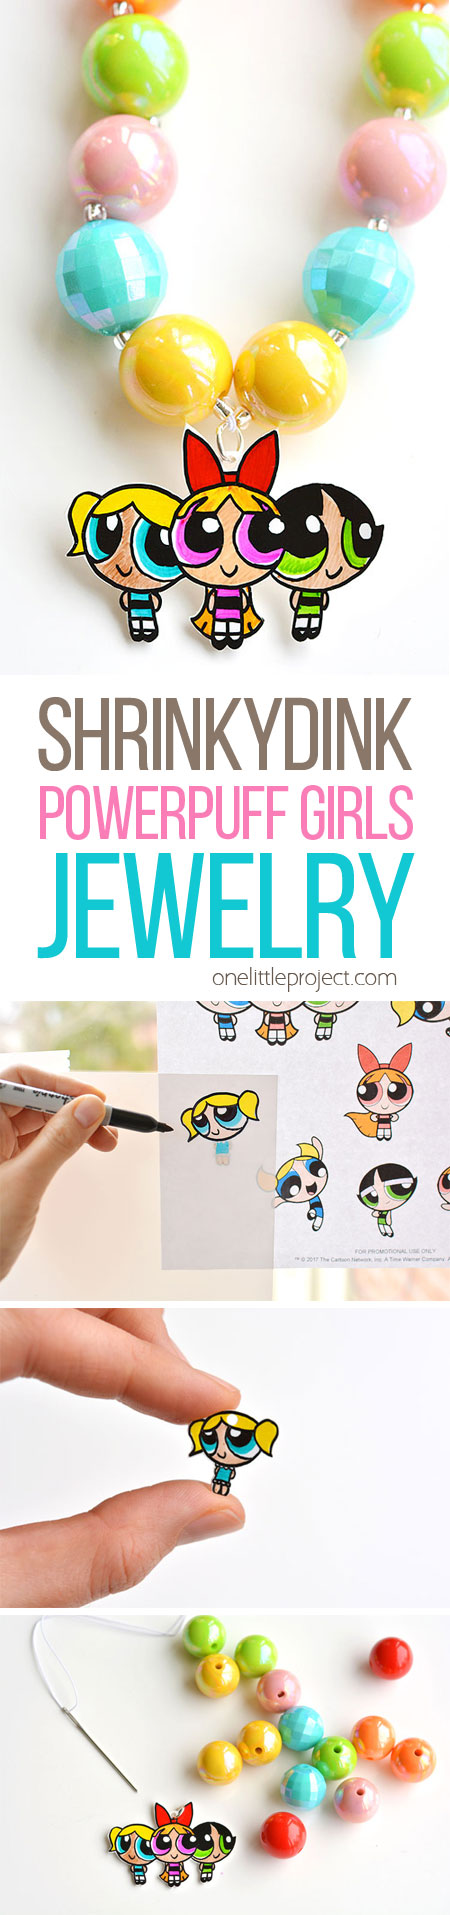 This Shrinky Dinks Powerpuff Girls jewelry is SO EASY to make and it looks completely adorable! Such a simple and awesome craft to do with the kids! #sponsored